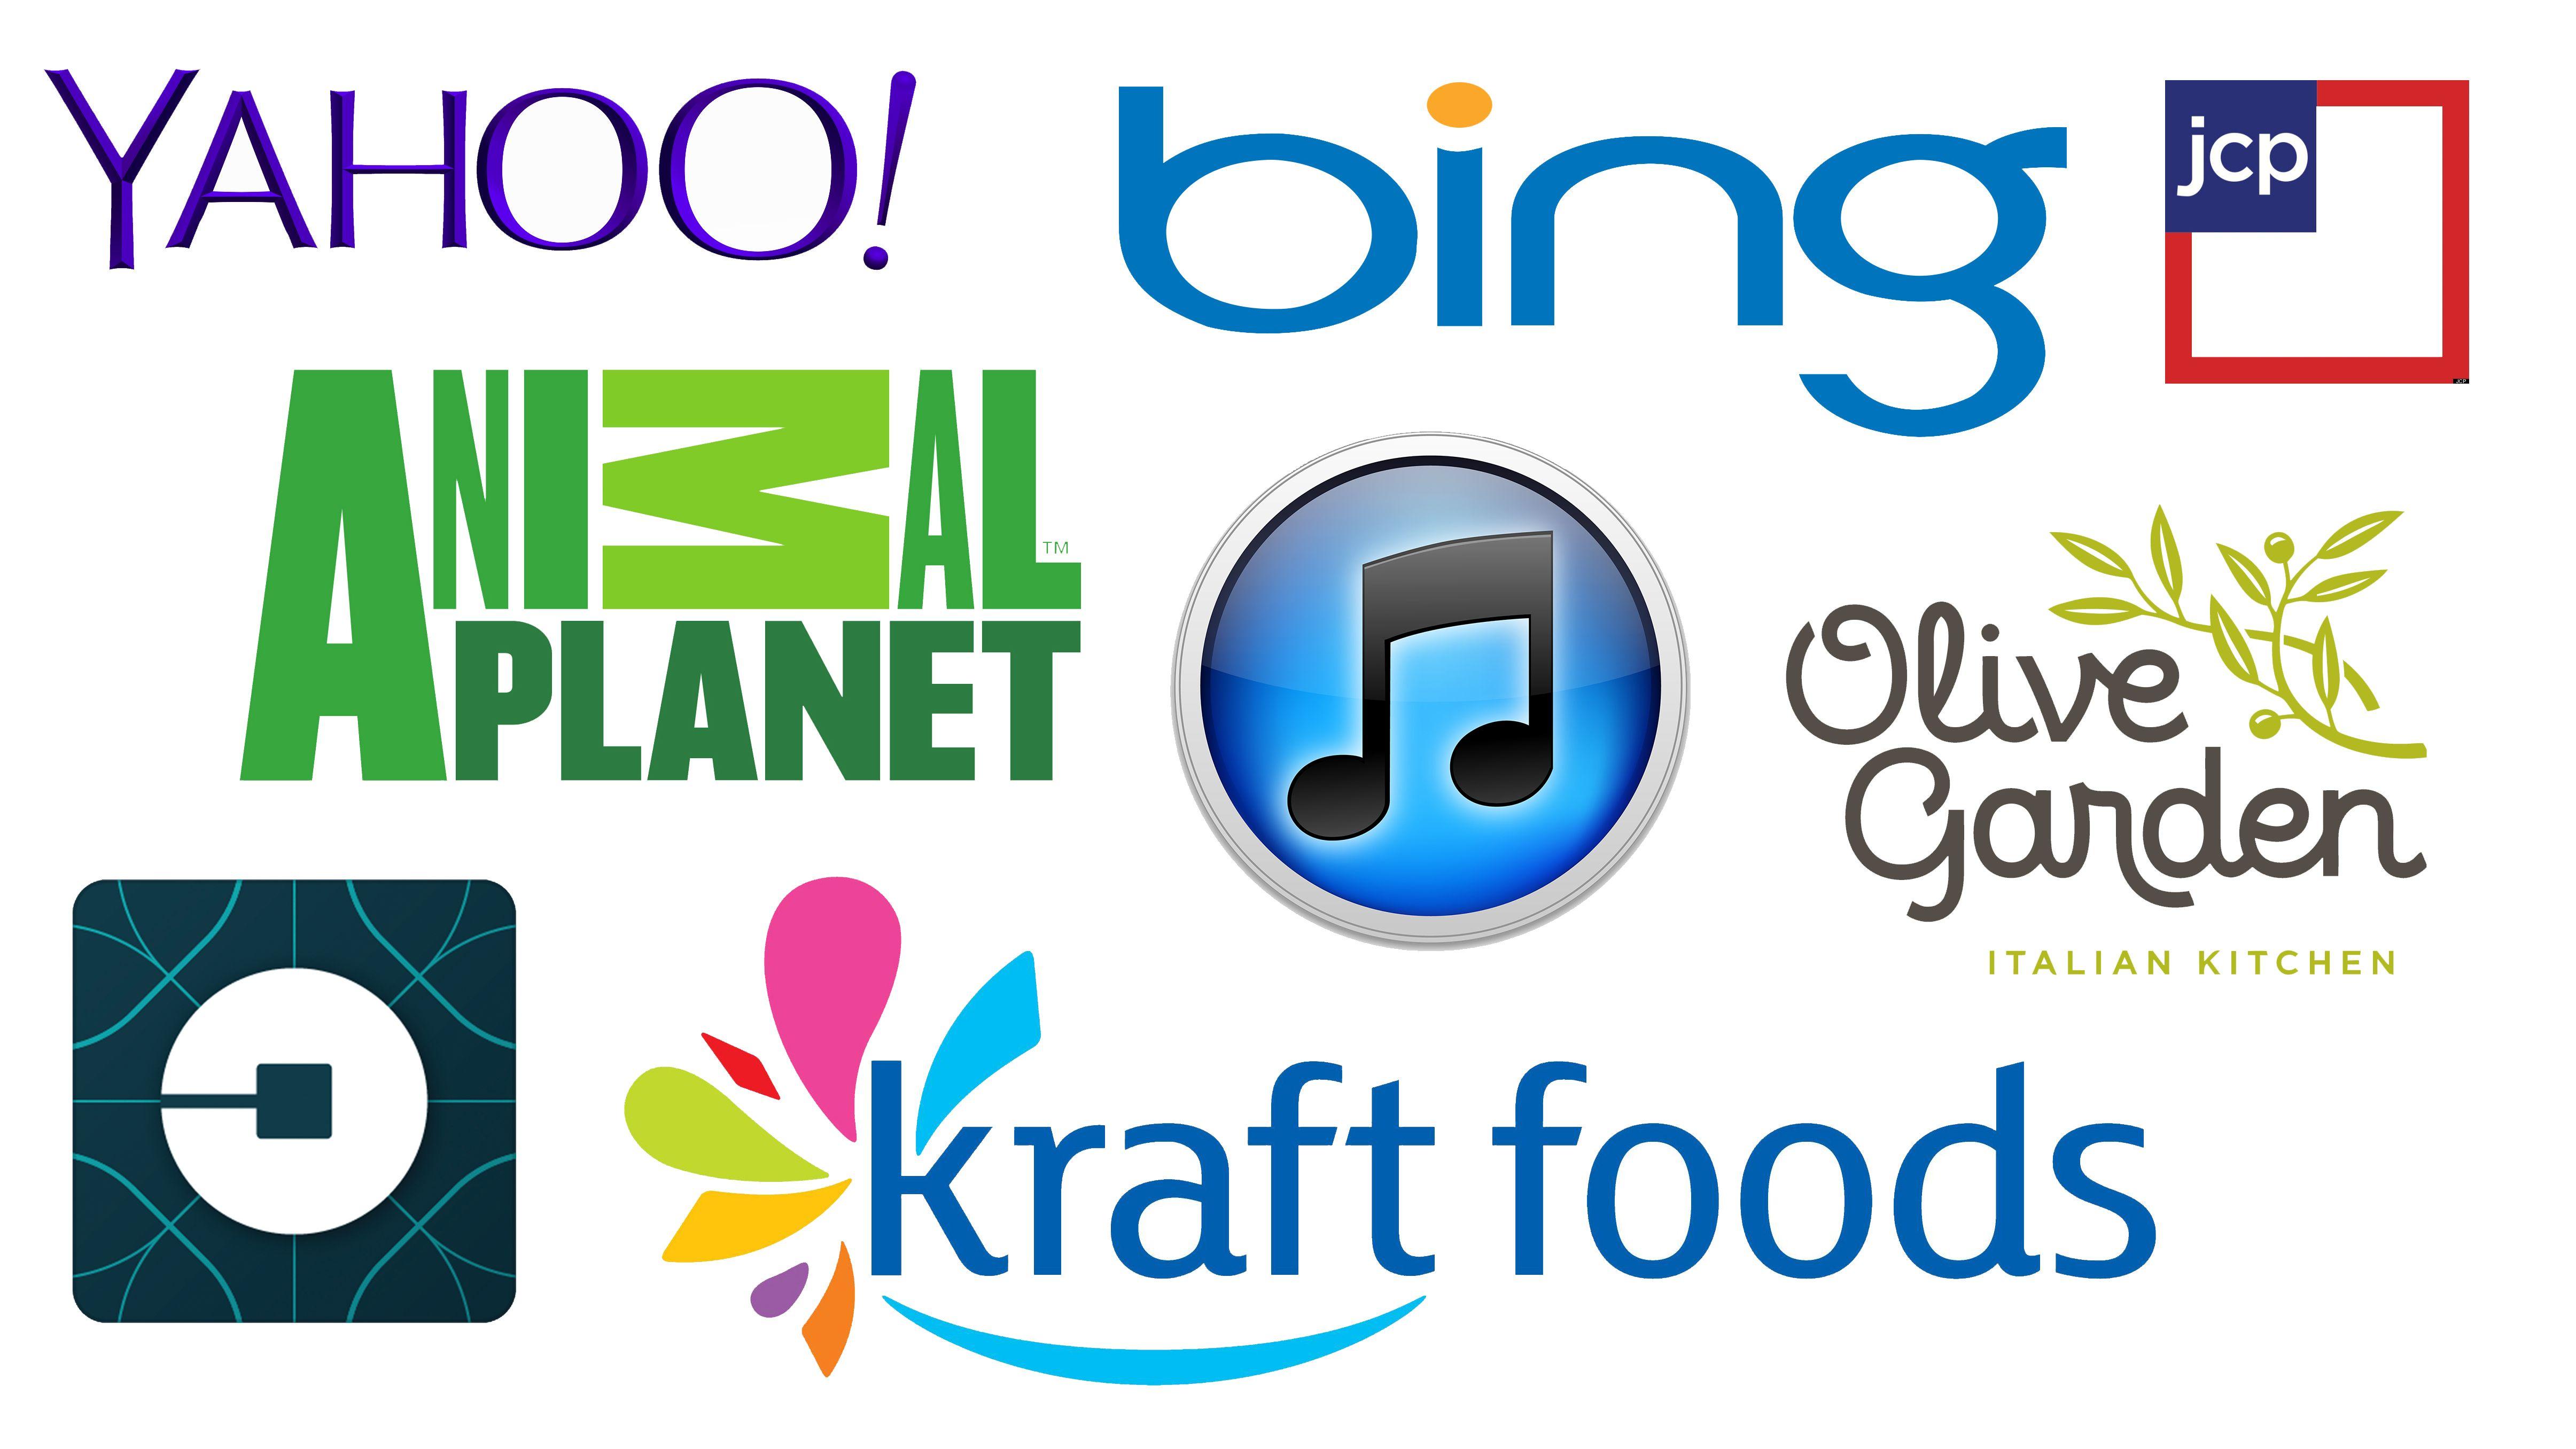 Bing Old New Logo - 7 logos we all love to hate (and lessons we can learn) | Creative Bloq